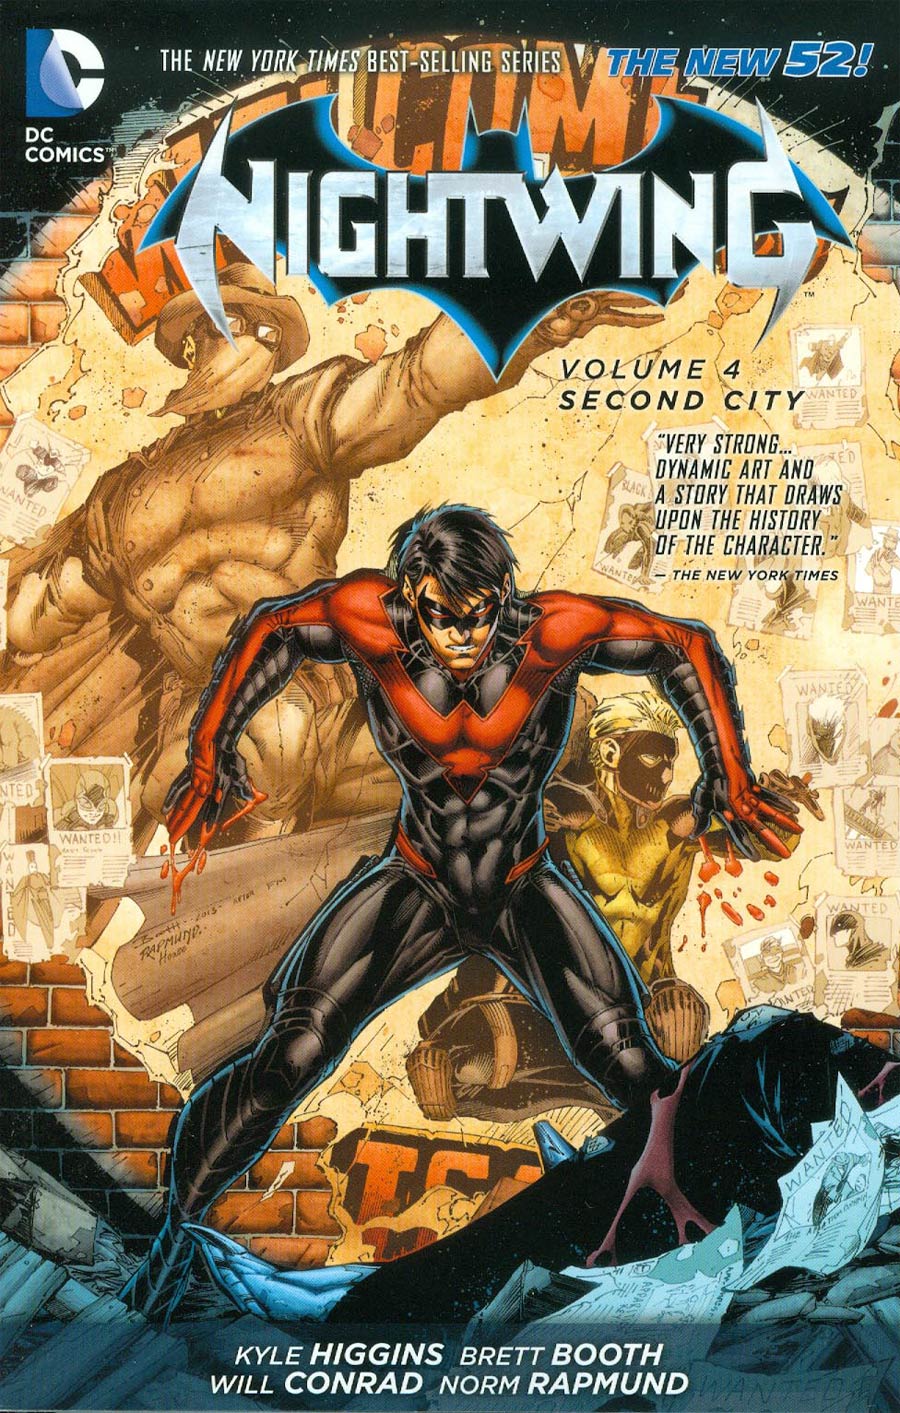 Nightwing (New 52) Vol 4 Second City TP